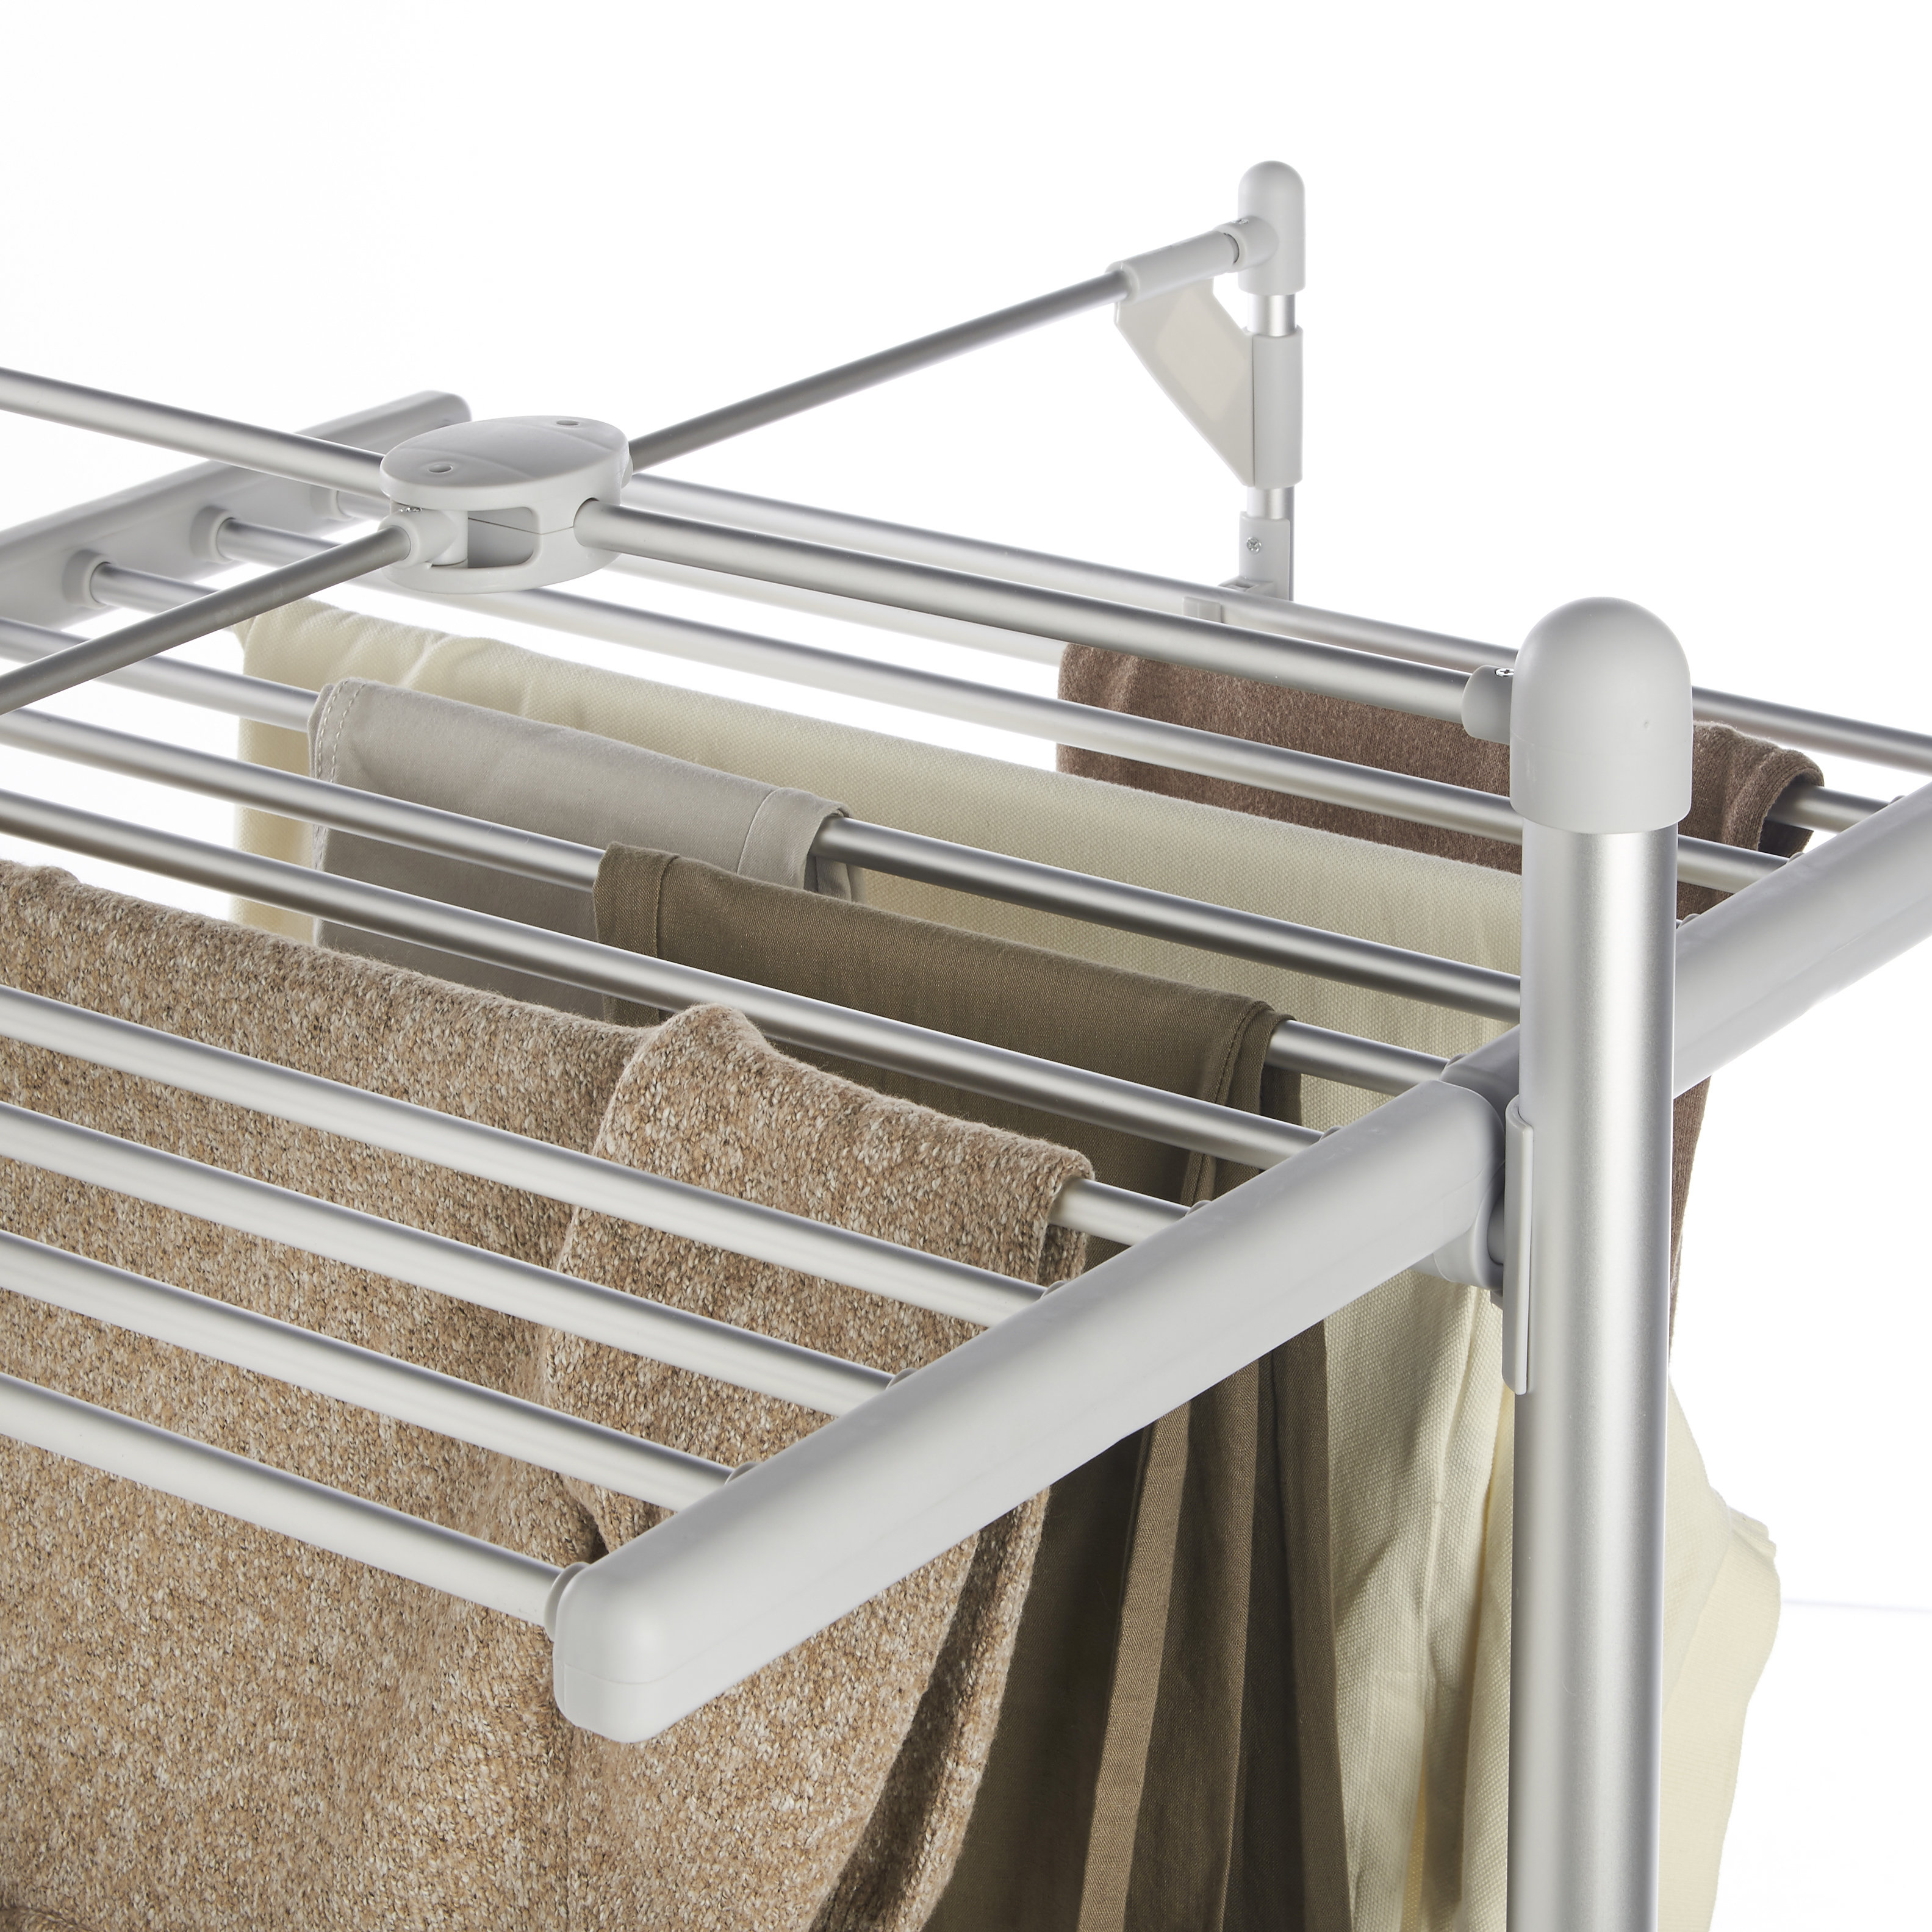 ELECTRIC CLOTHES DRYING RACK – Auroca